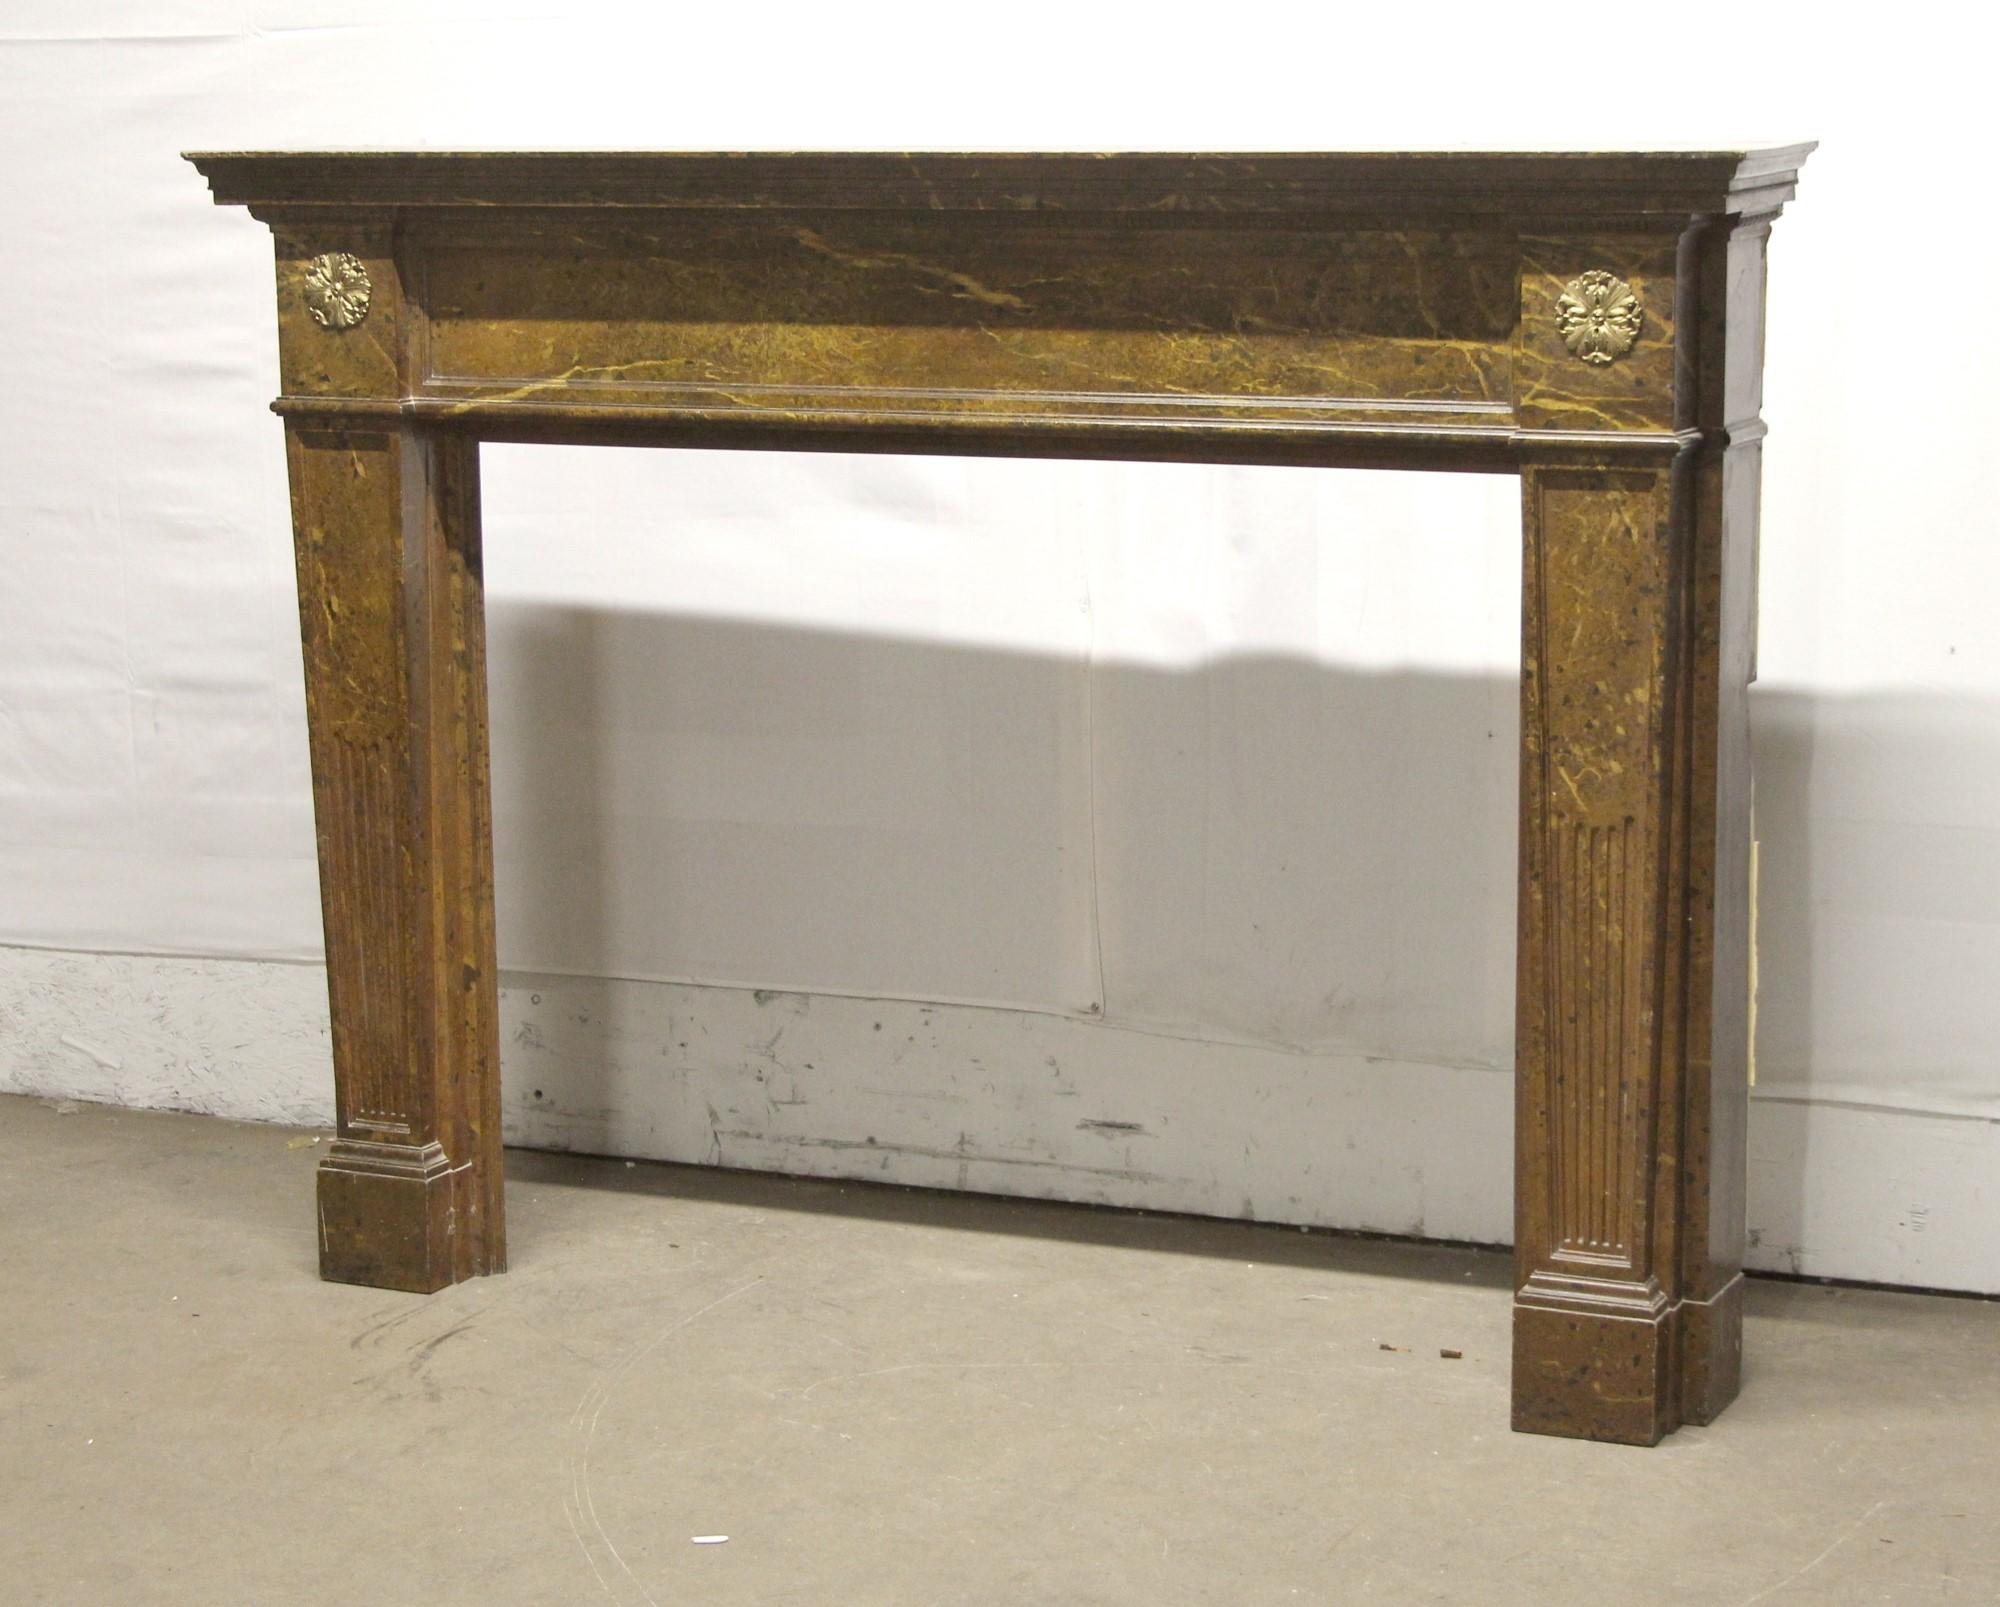 1910s Regency style wood mantel with two brass florets painted in a faux marble manner. Please note, this item is located in our Scranton, PA location.